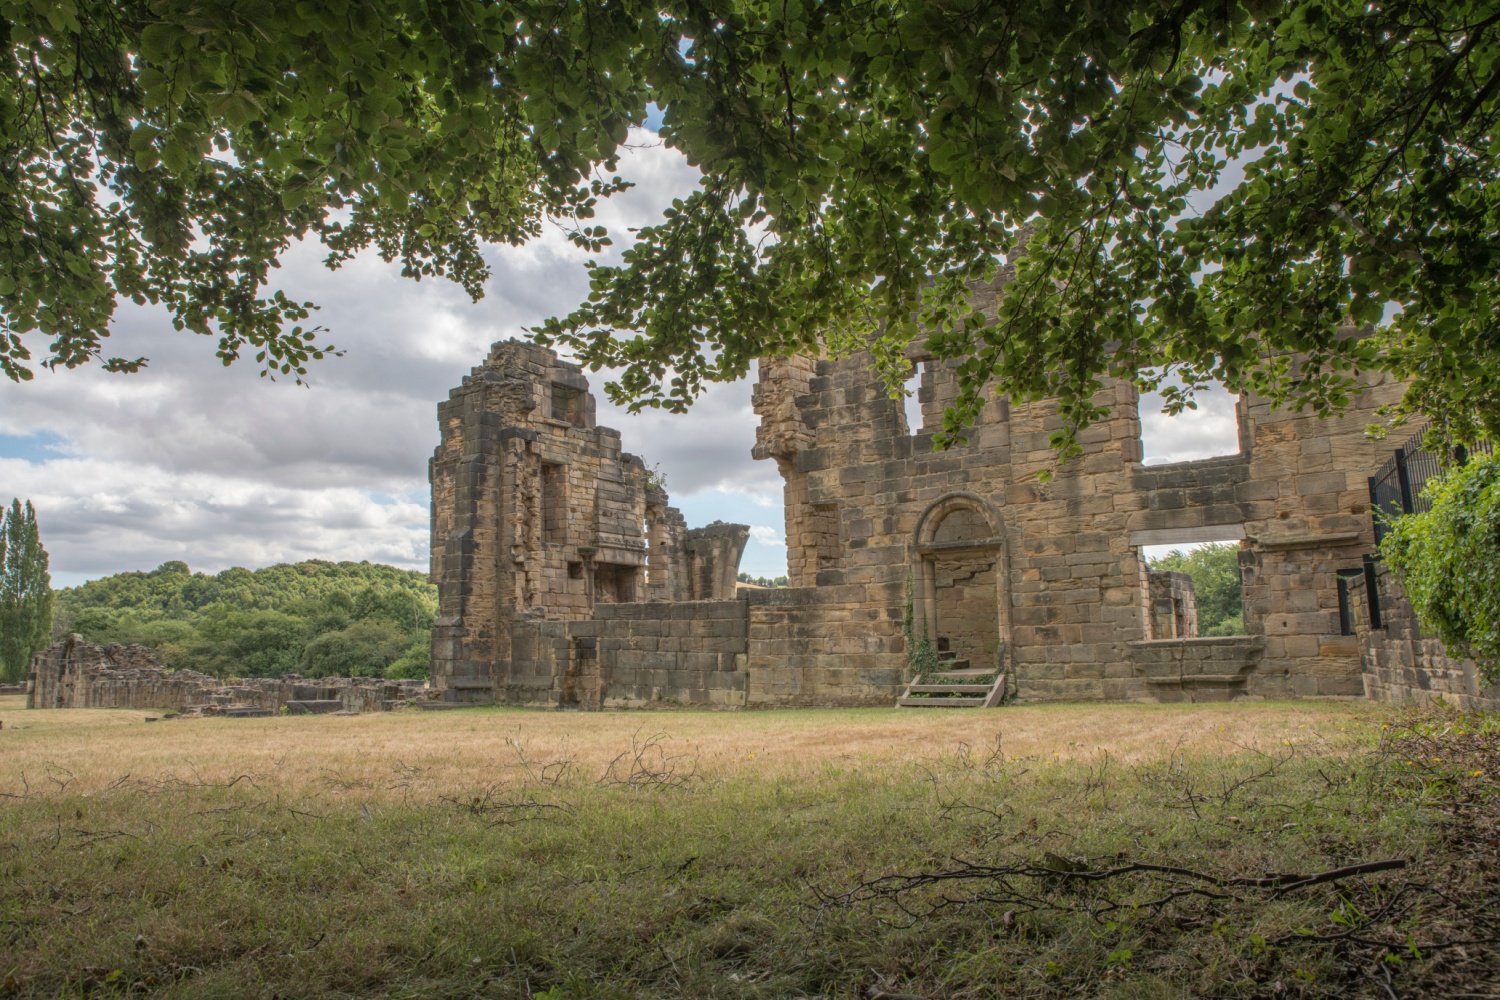 Image name monk bretton priory barnsley south yorkshire the 2 image from the post A look at the history of Monk Bretton Priory, Barnsley, with Dr Emma Wells in Yorkshire.com.